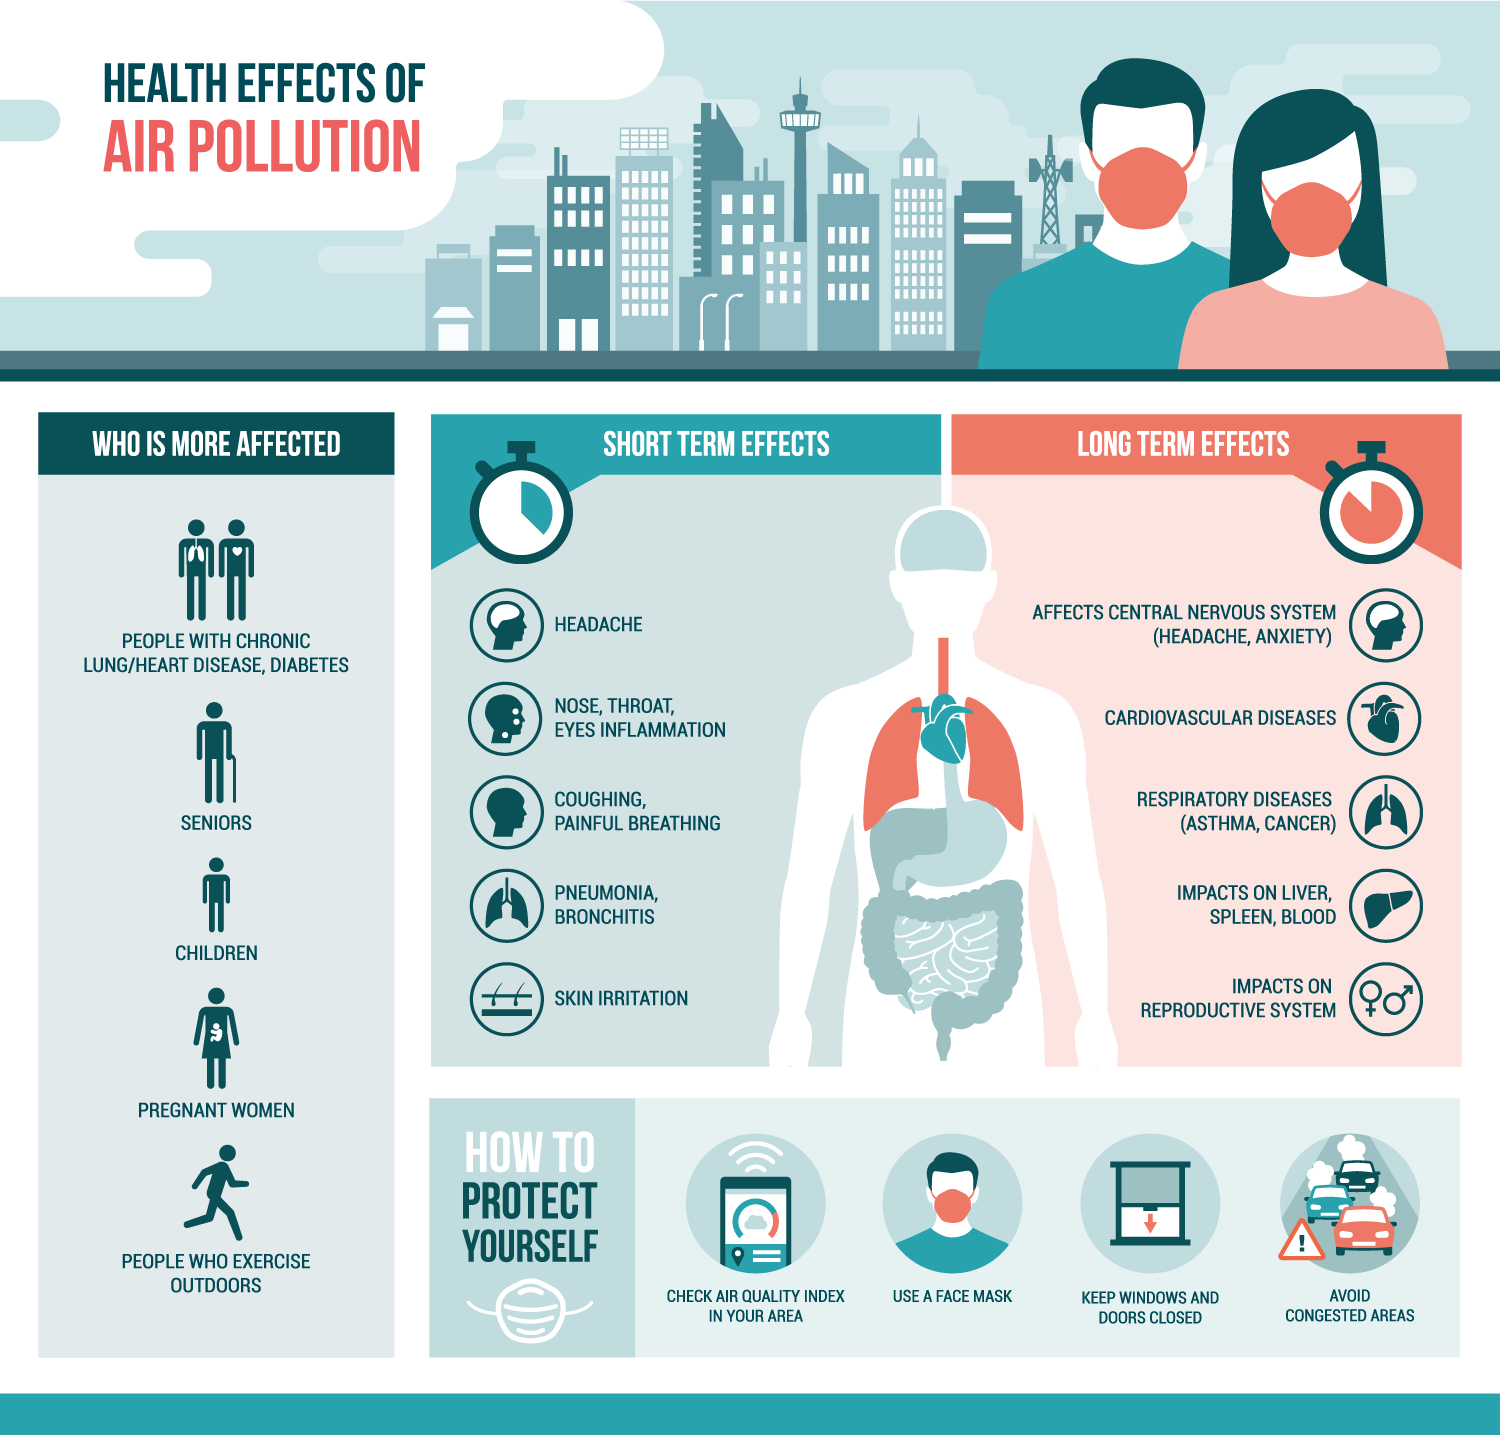 An image showing the short and long term effects of air pollution. Short term effects include headache, eye and throat inflammation, coughing and painful breathing, bronchitis and pheumonia, and skin irritation. Long term effects include affects to the central nervous system (including anxiety), cardiovascular diseases, respiratory diseases (asthma, cancer), impacts on the liver, spleen, and blood, and impacts on the reproductive system. The chart also says that seniors, children, pregnant women, people who exercise outdoors, and people with chronic lung/heart disease and diabetes are more effected by air pollution. To protect yourself, check the air quality index, use a face mask, keep windows and doors closed, and avoid congested areas.